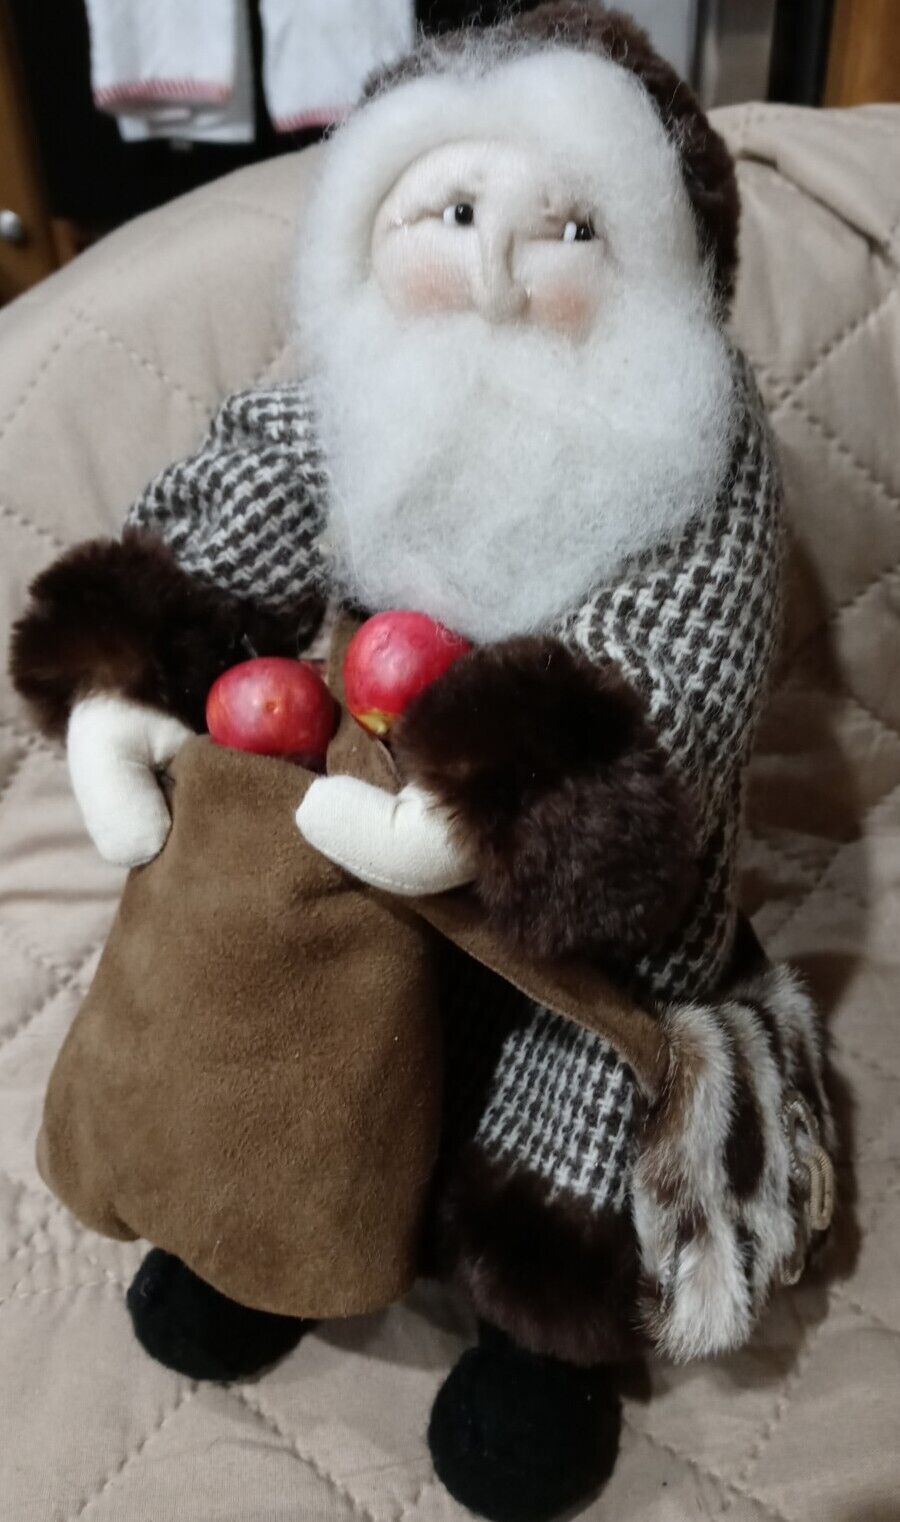 Old World Fabric Santa on Stand in Brown Check Coat With Apples & Fur Bag/Trim